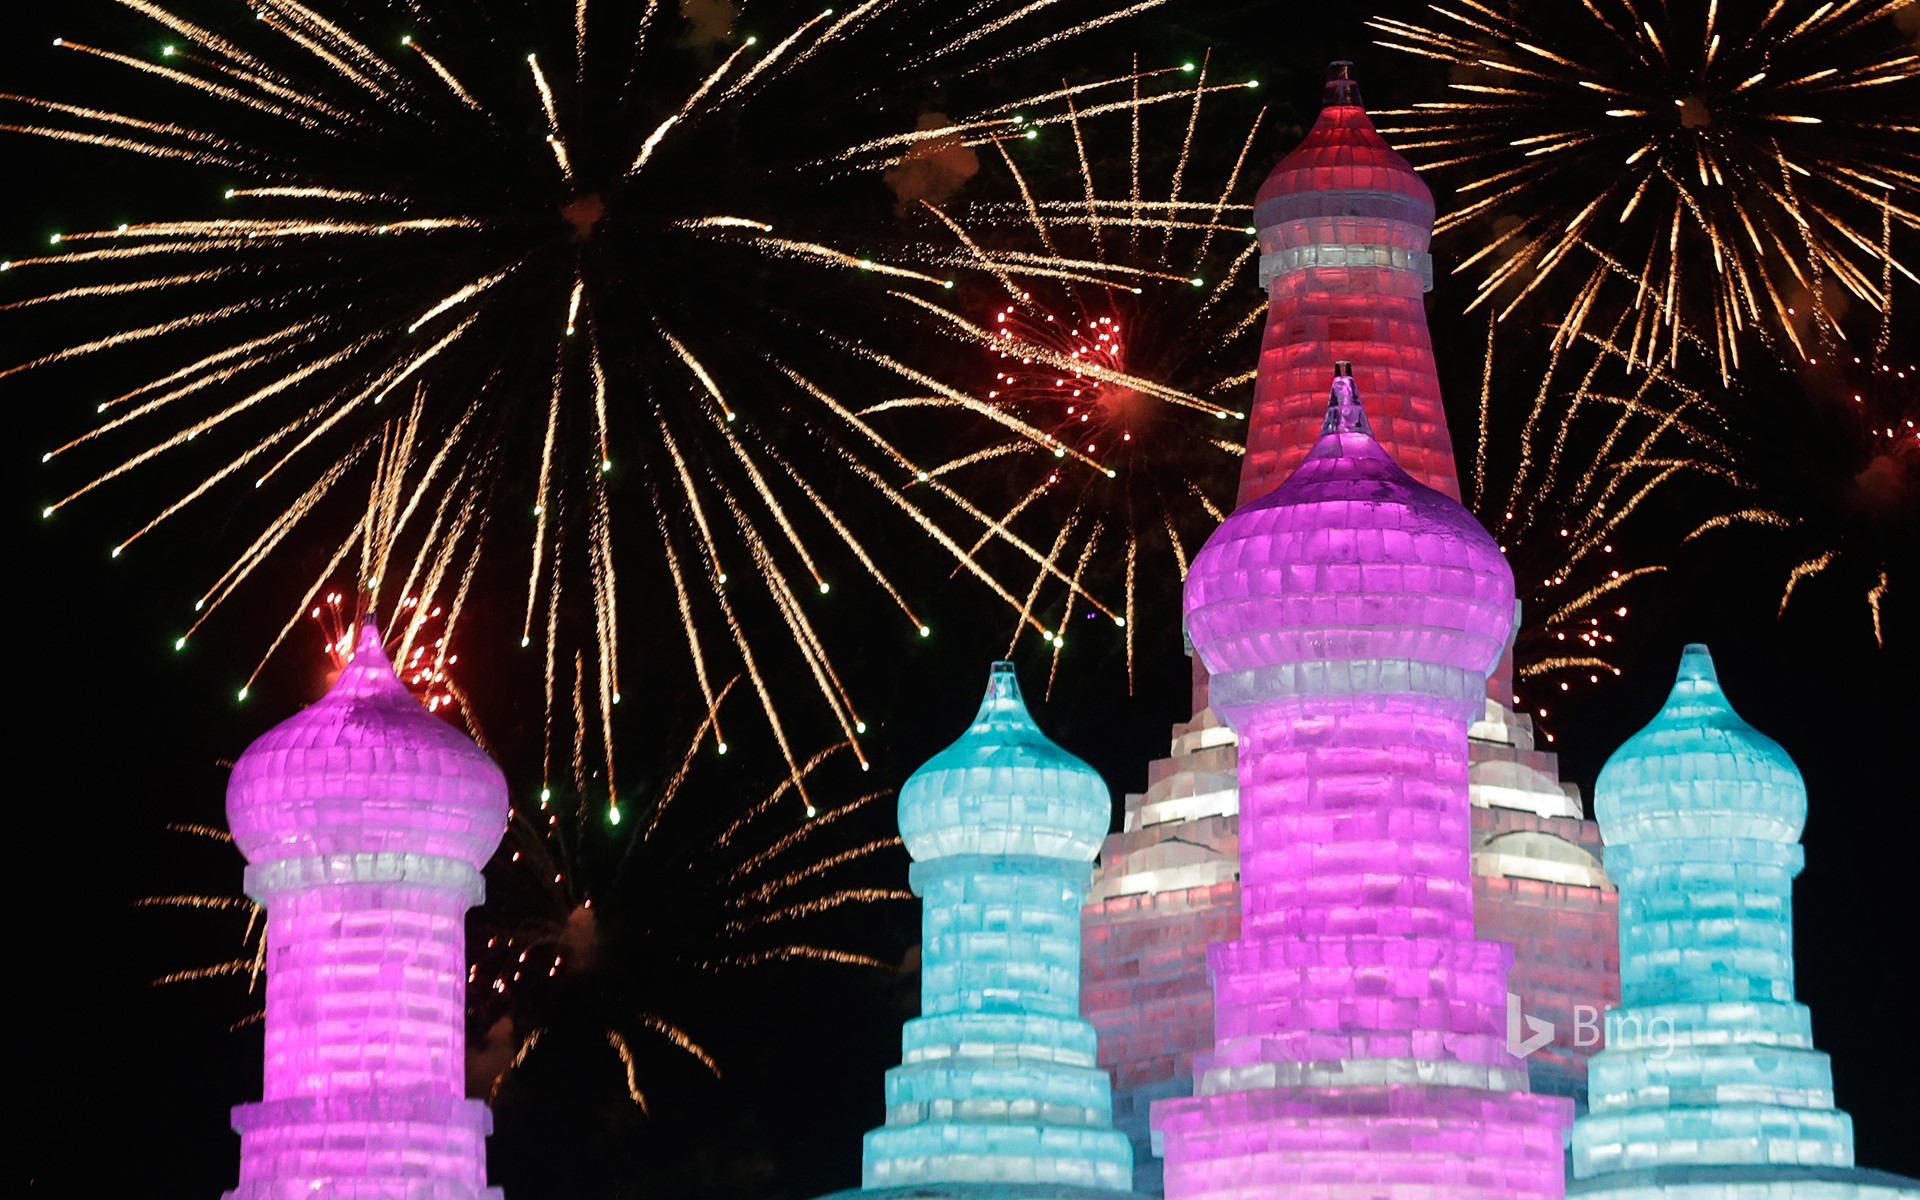 [Great Cold Today] Fireworks in full bloom at Harbin International Snow and Ice Festival, Harbin, Heilongjiang